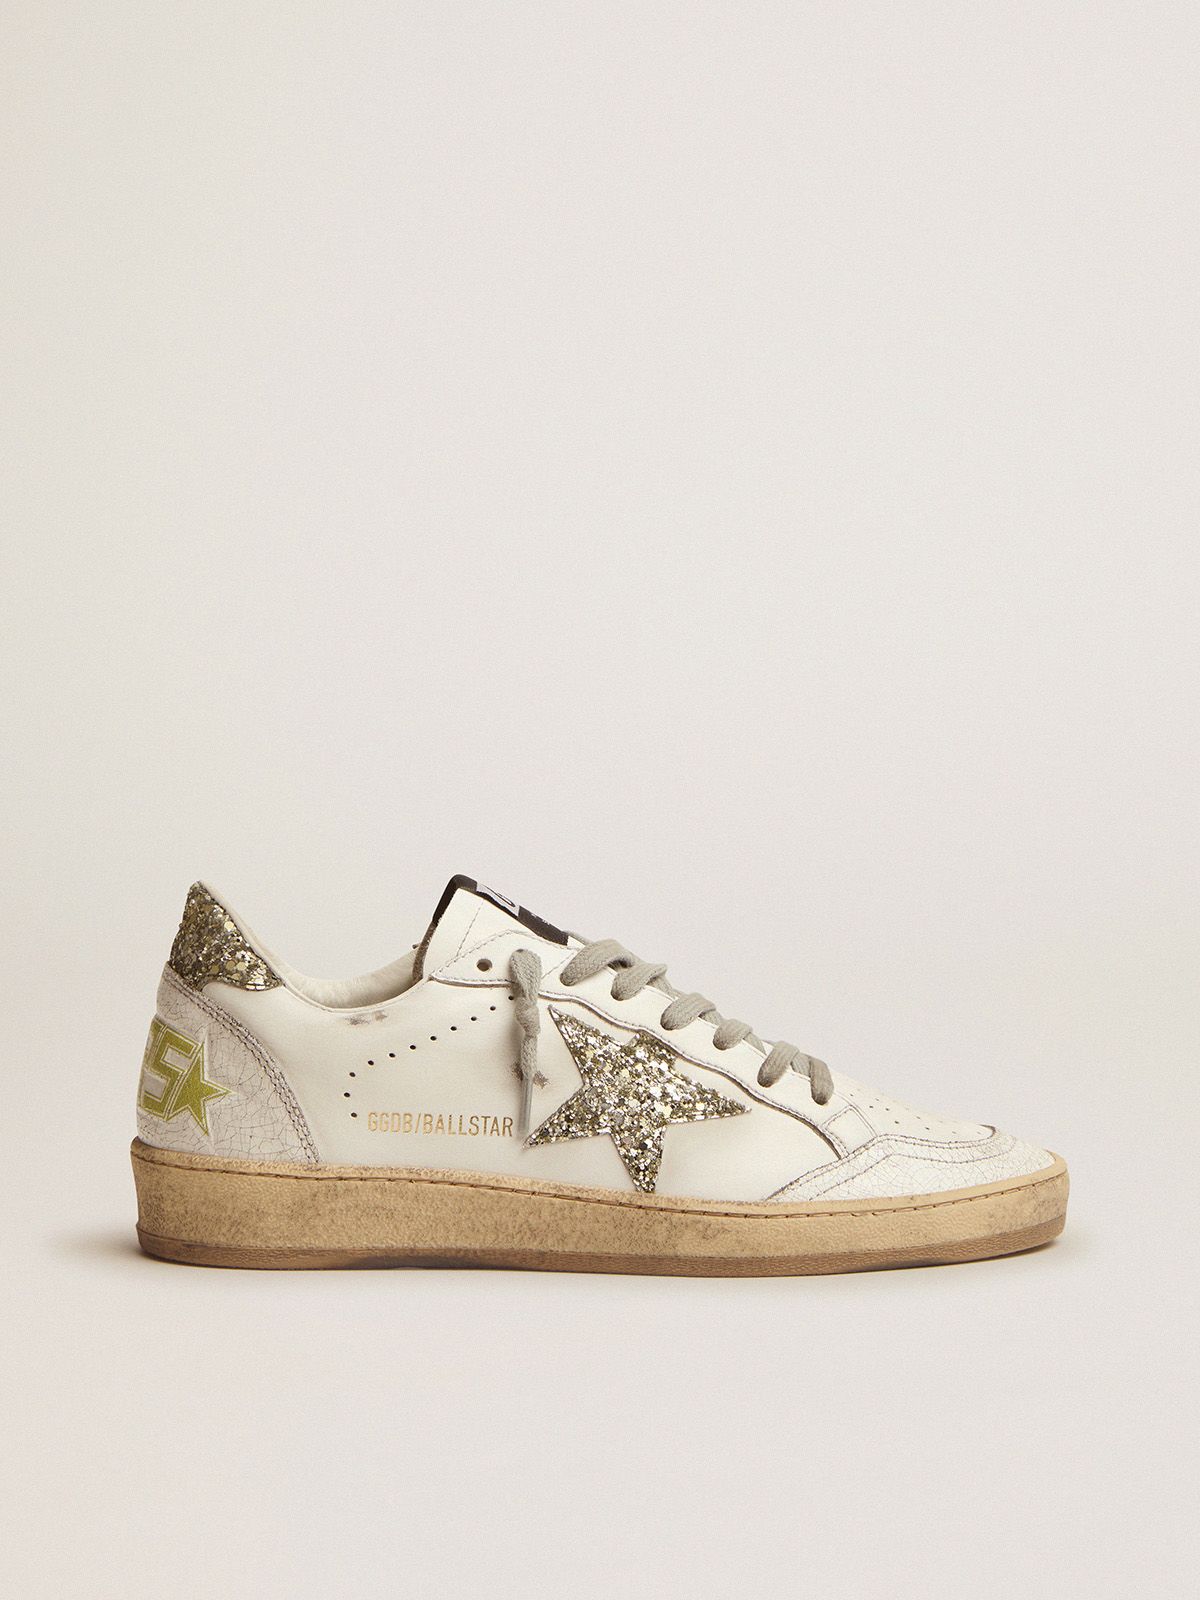 Ball Star LTD sneakers in white leather with light green glitter